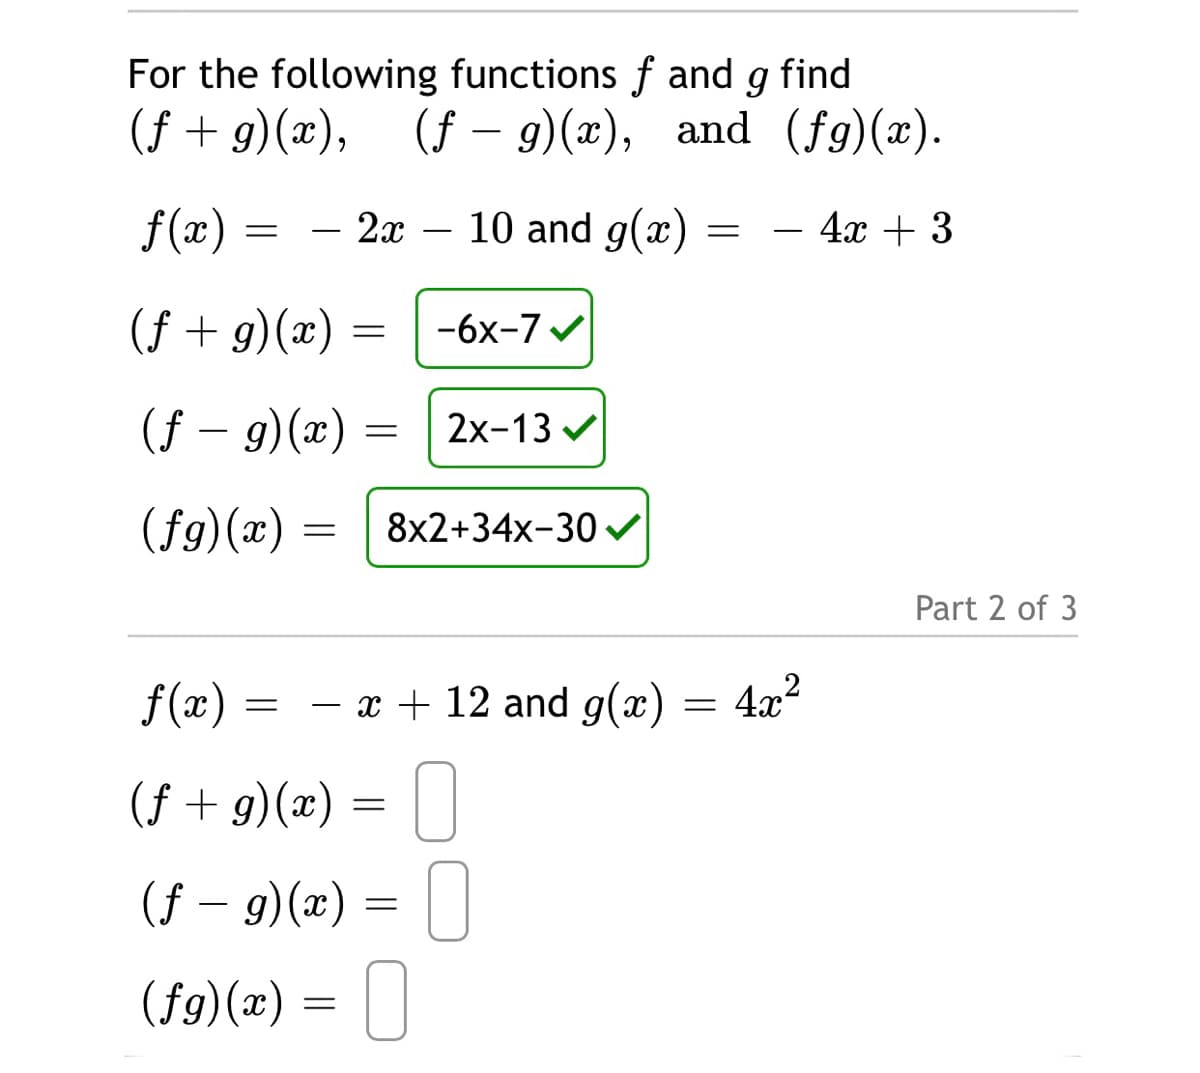 For the following functions f and g find
(f + g)(x), (f – 9)(x), and (fg)(x).
f(x) :
2x – 10 and g(x)
4x + 3
-
-
(f + g)(x)
-6x-7
(f – 9)(x) =
2x-13 v
(fg)(x) =
8x2+34x-30
Part 2 of 3
f(x)
- x + 12 and g(x)
4x?
(f + g)(x) = | ]
(f – 9)(x) = | |
(f9)(x) = ||
